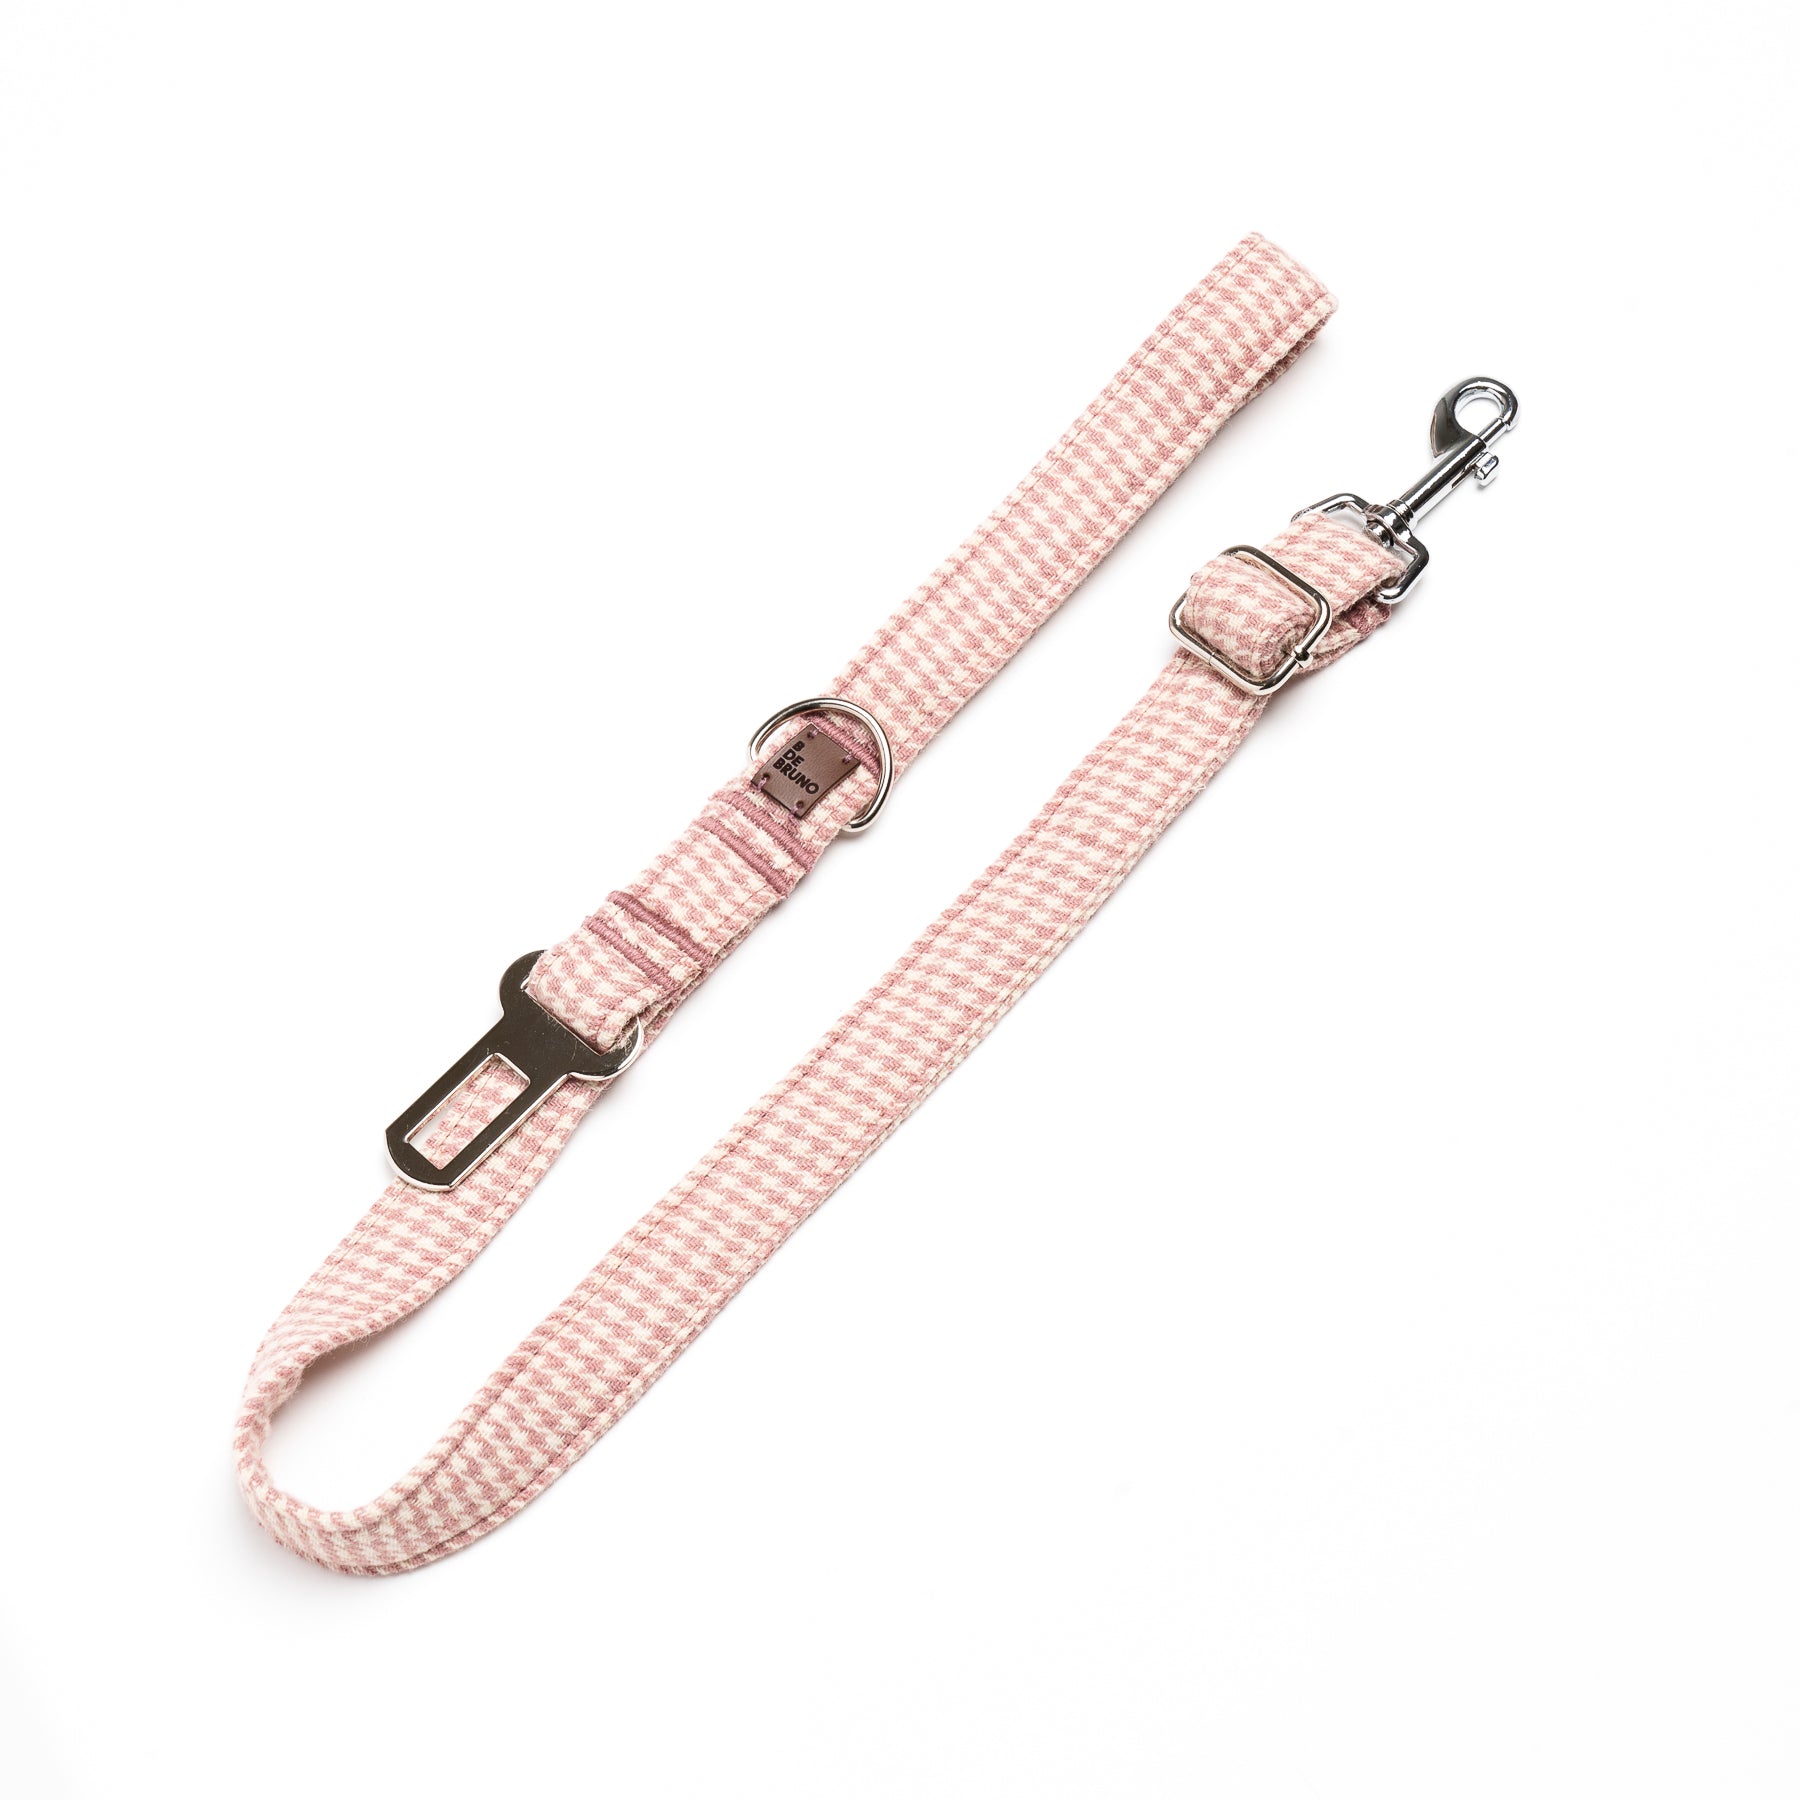 Aristocrazy 2 in 1 approved car belt